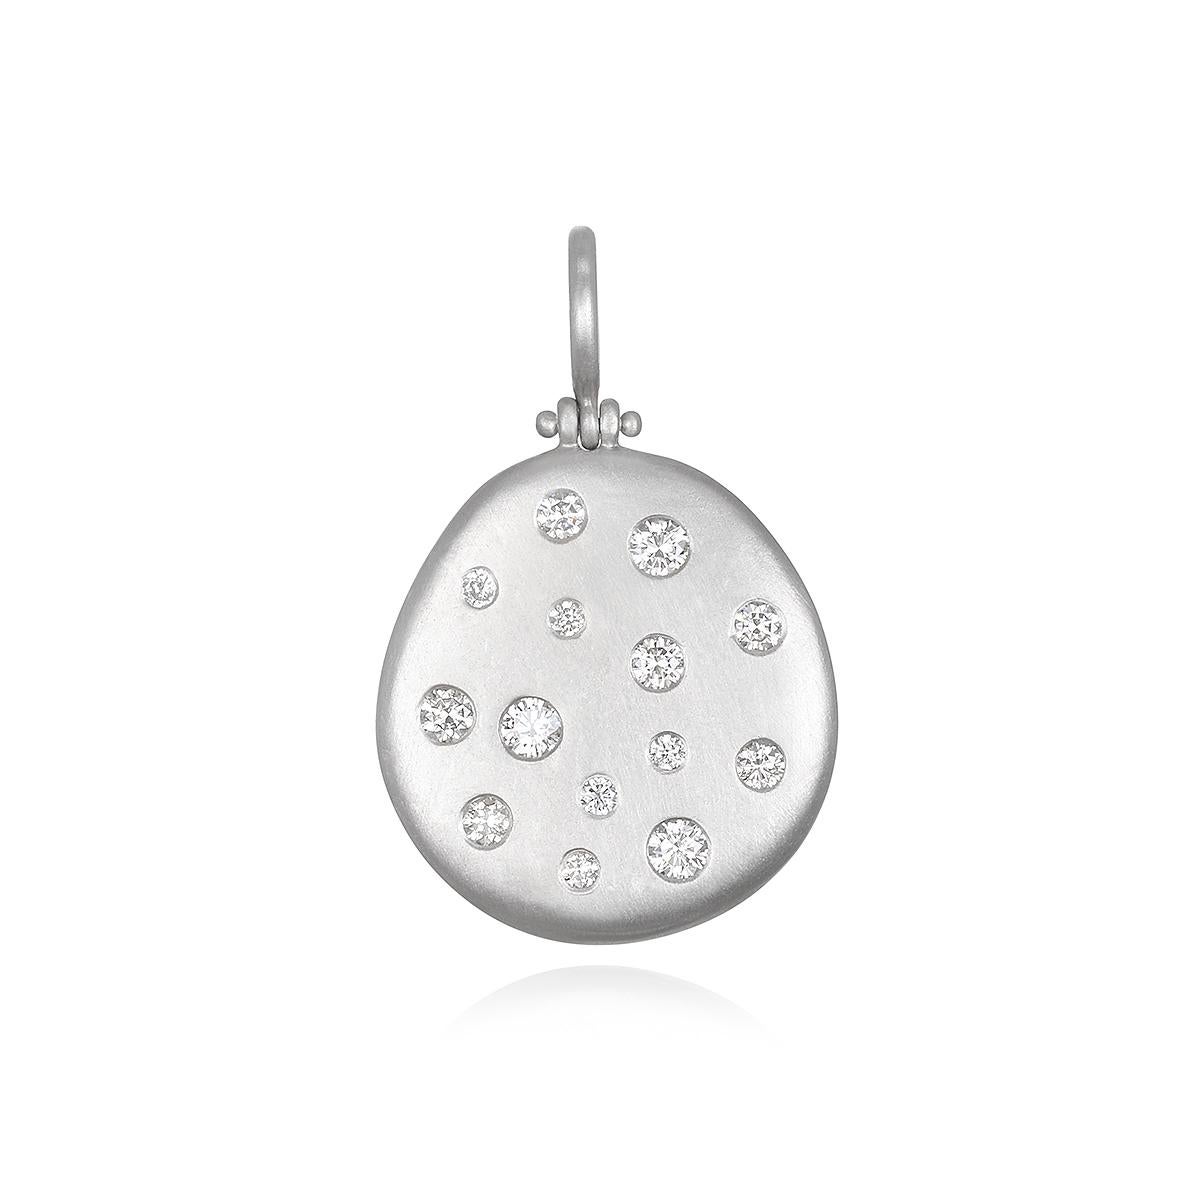 Women's or Men's Faye Kim Platinum Hinged Dog Tag Necklace, Medium For Sale